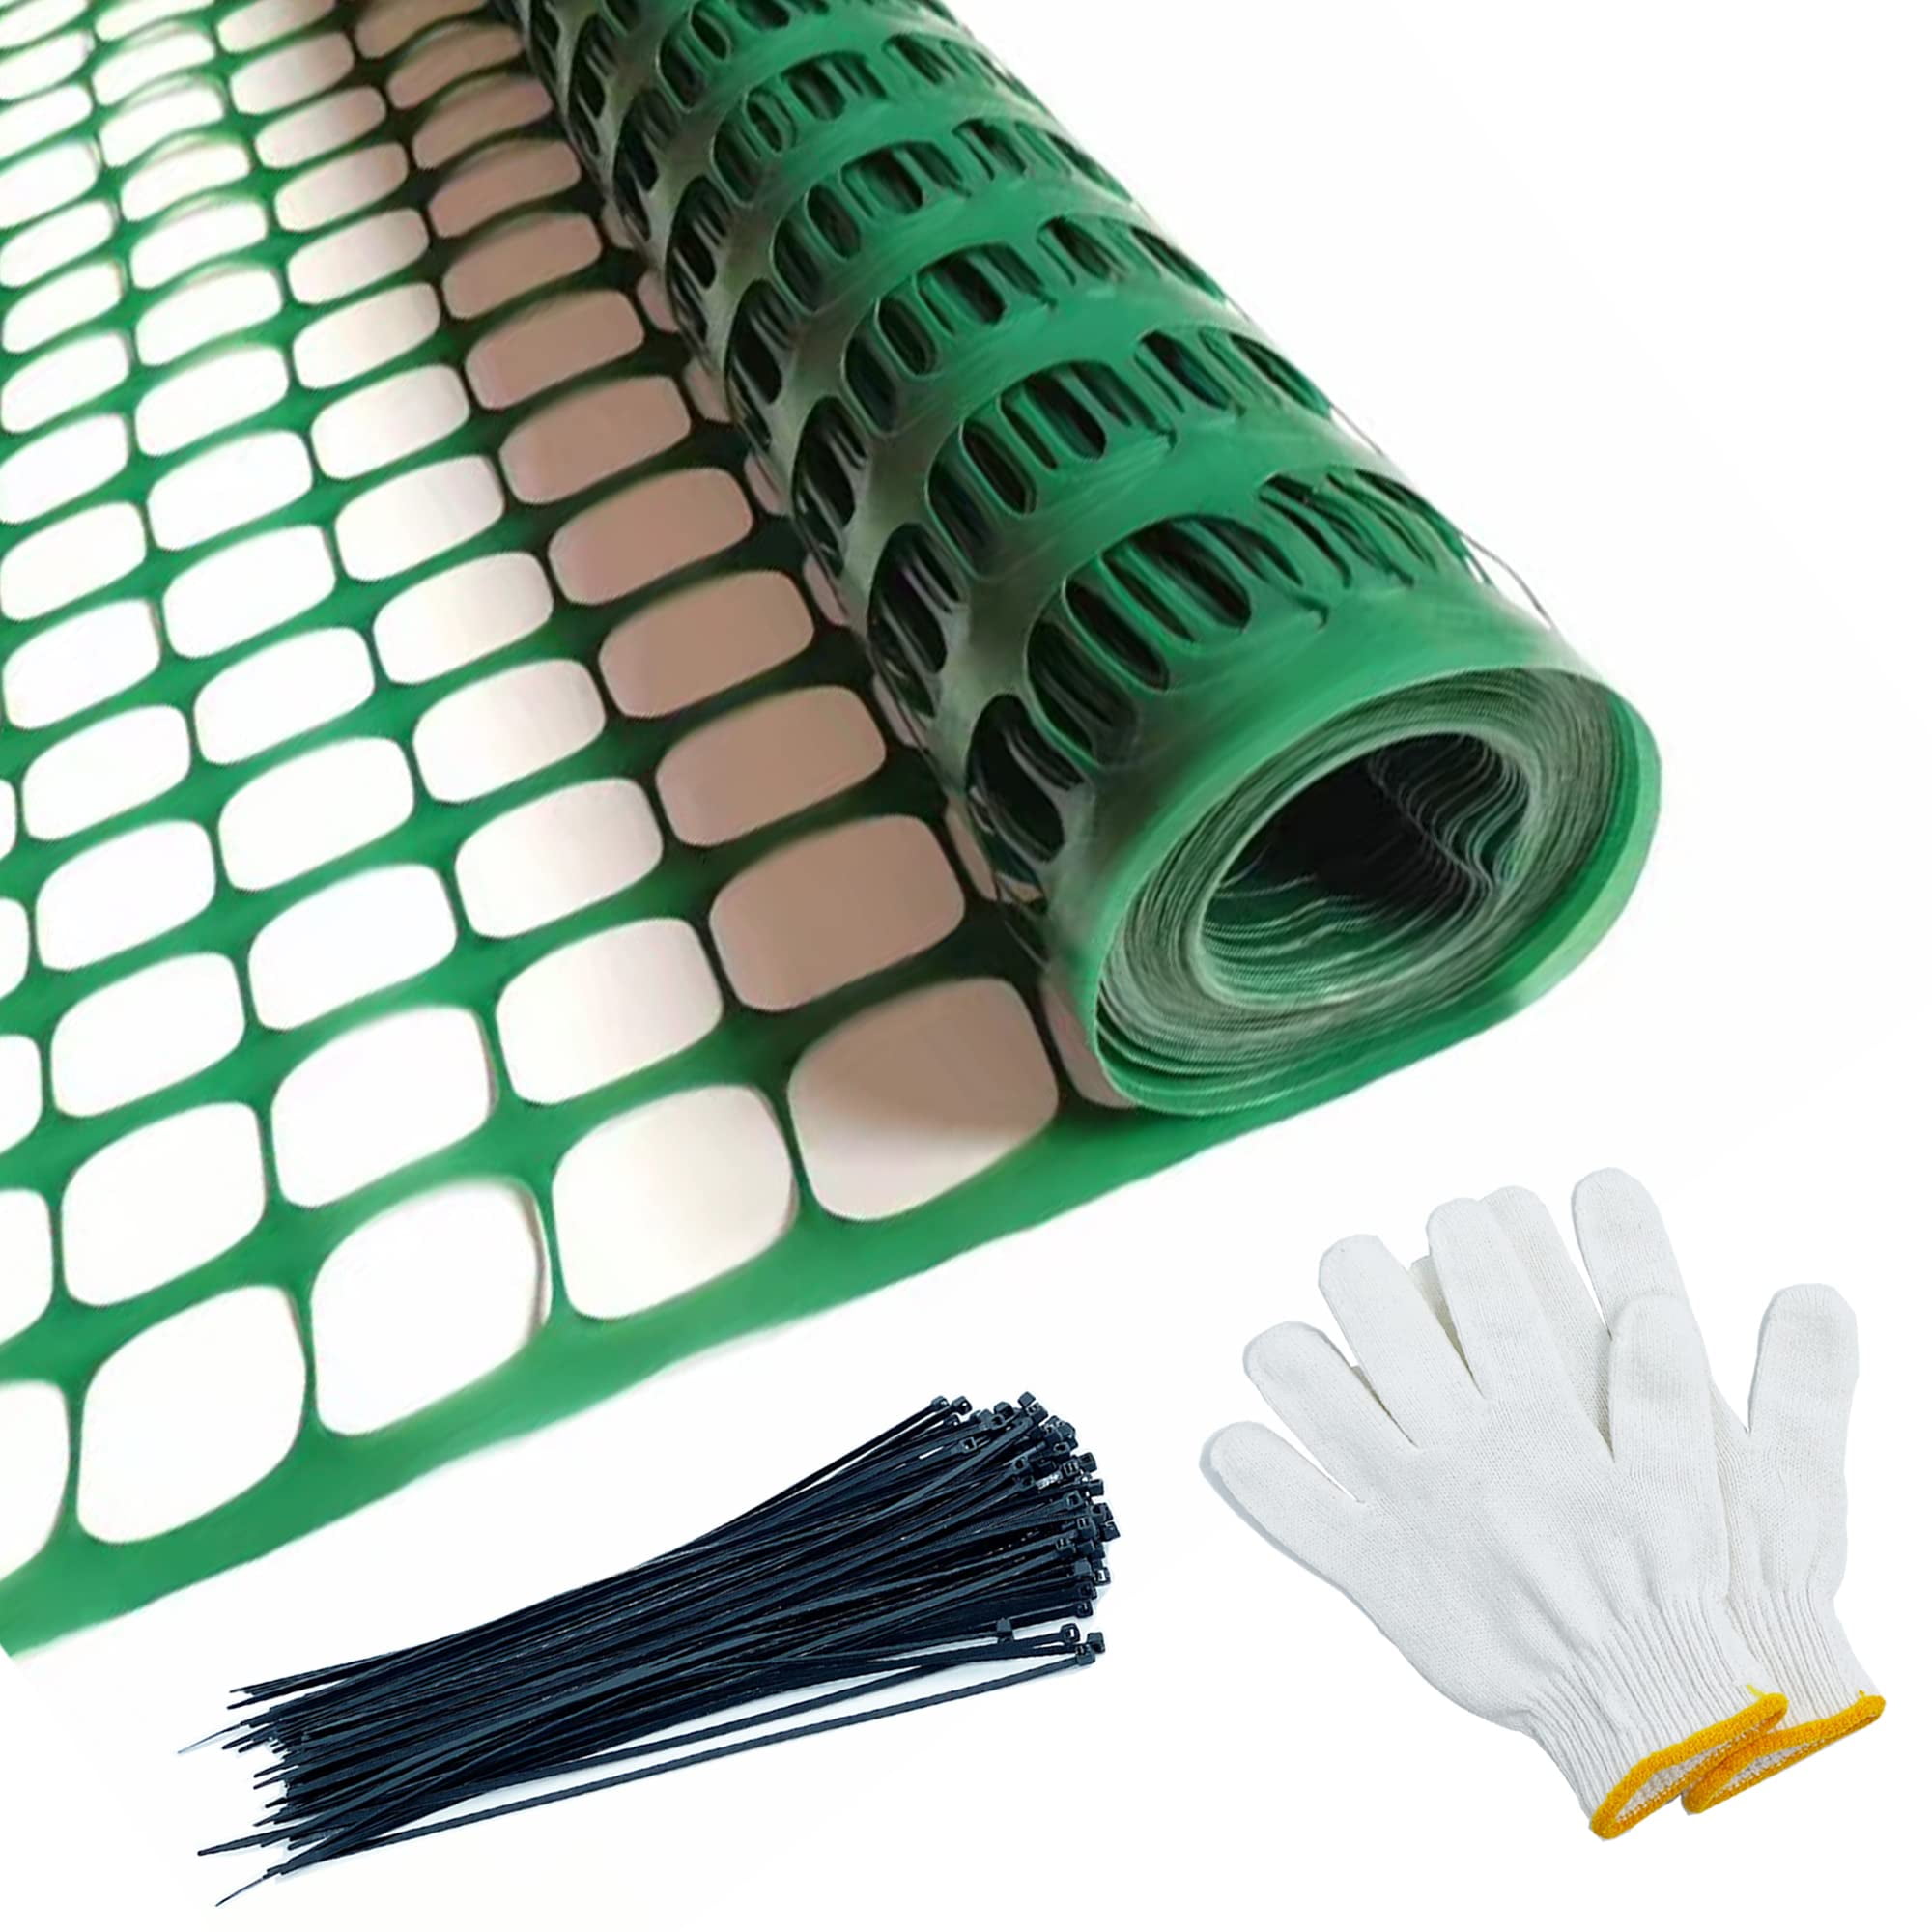 Safety Fence Plastic Mesh Fencing Roll, 4'x100' feet 1 Roll with 100 ...